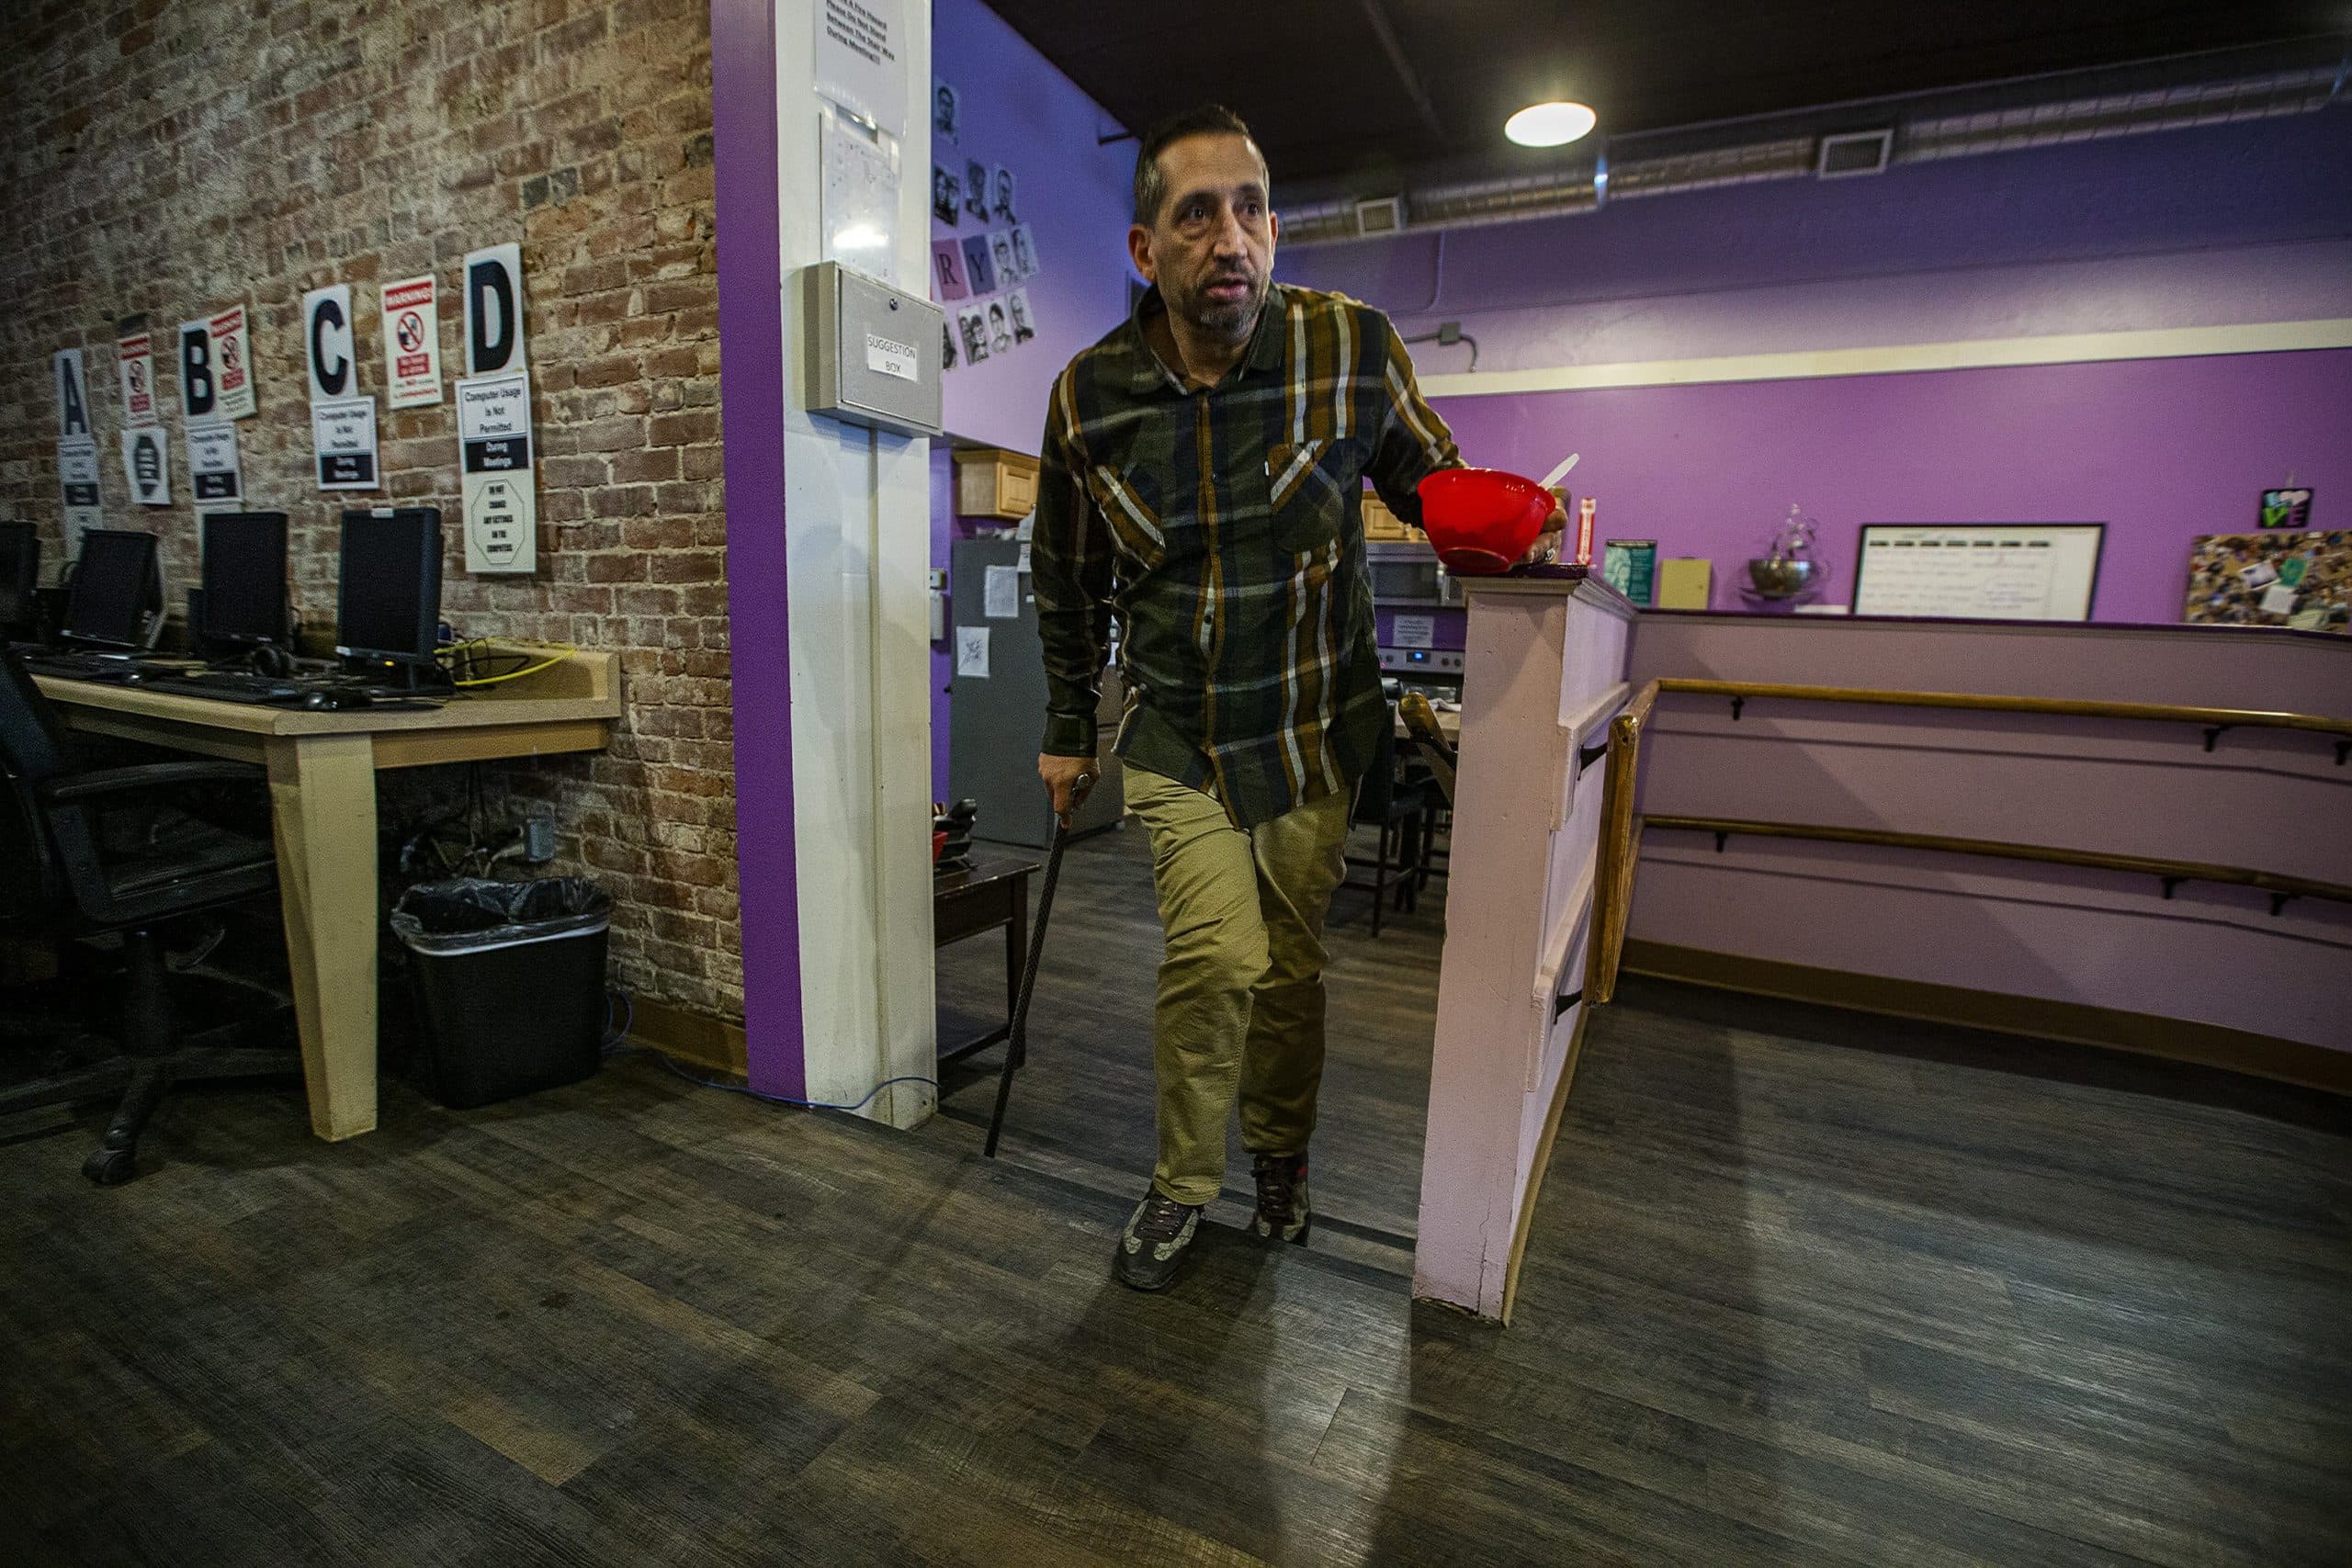 Walking with a cane, Michael Earielo climbs the stairs at a drug recovery center he manages in Worcester. (Jesse Costa/WBUR)